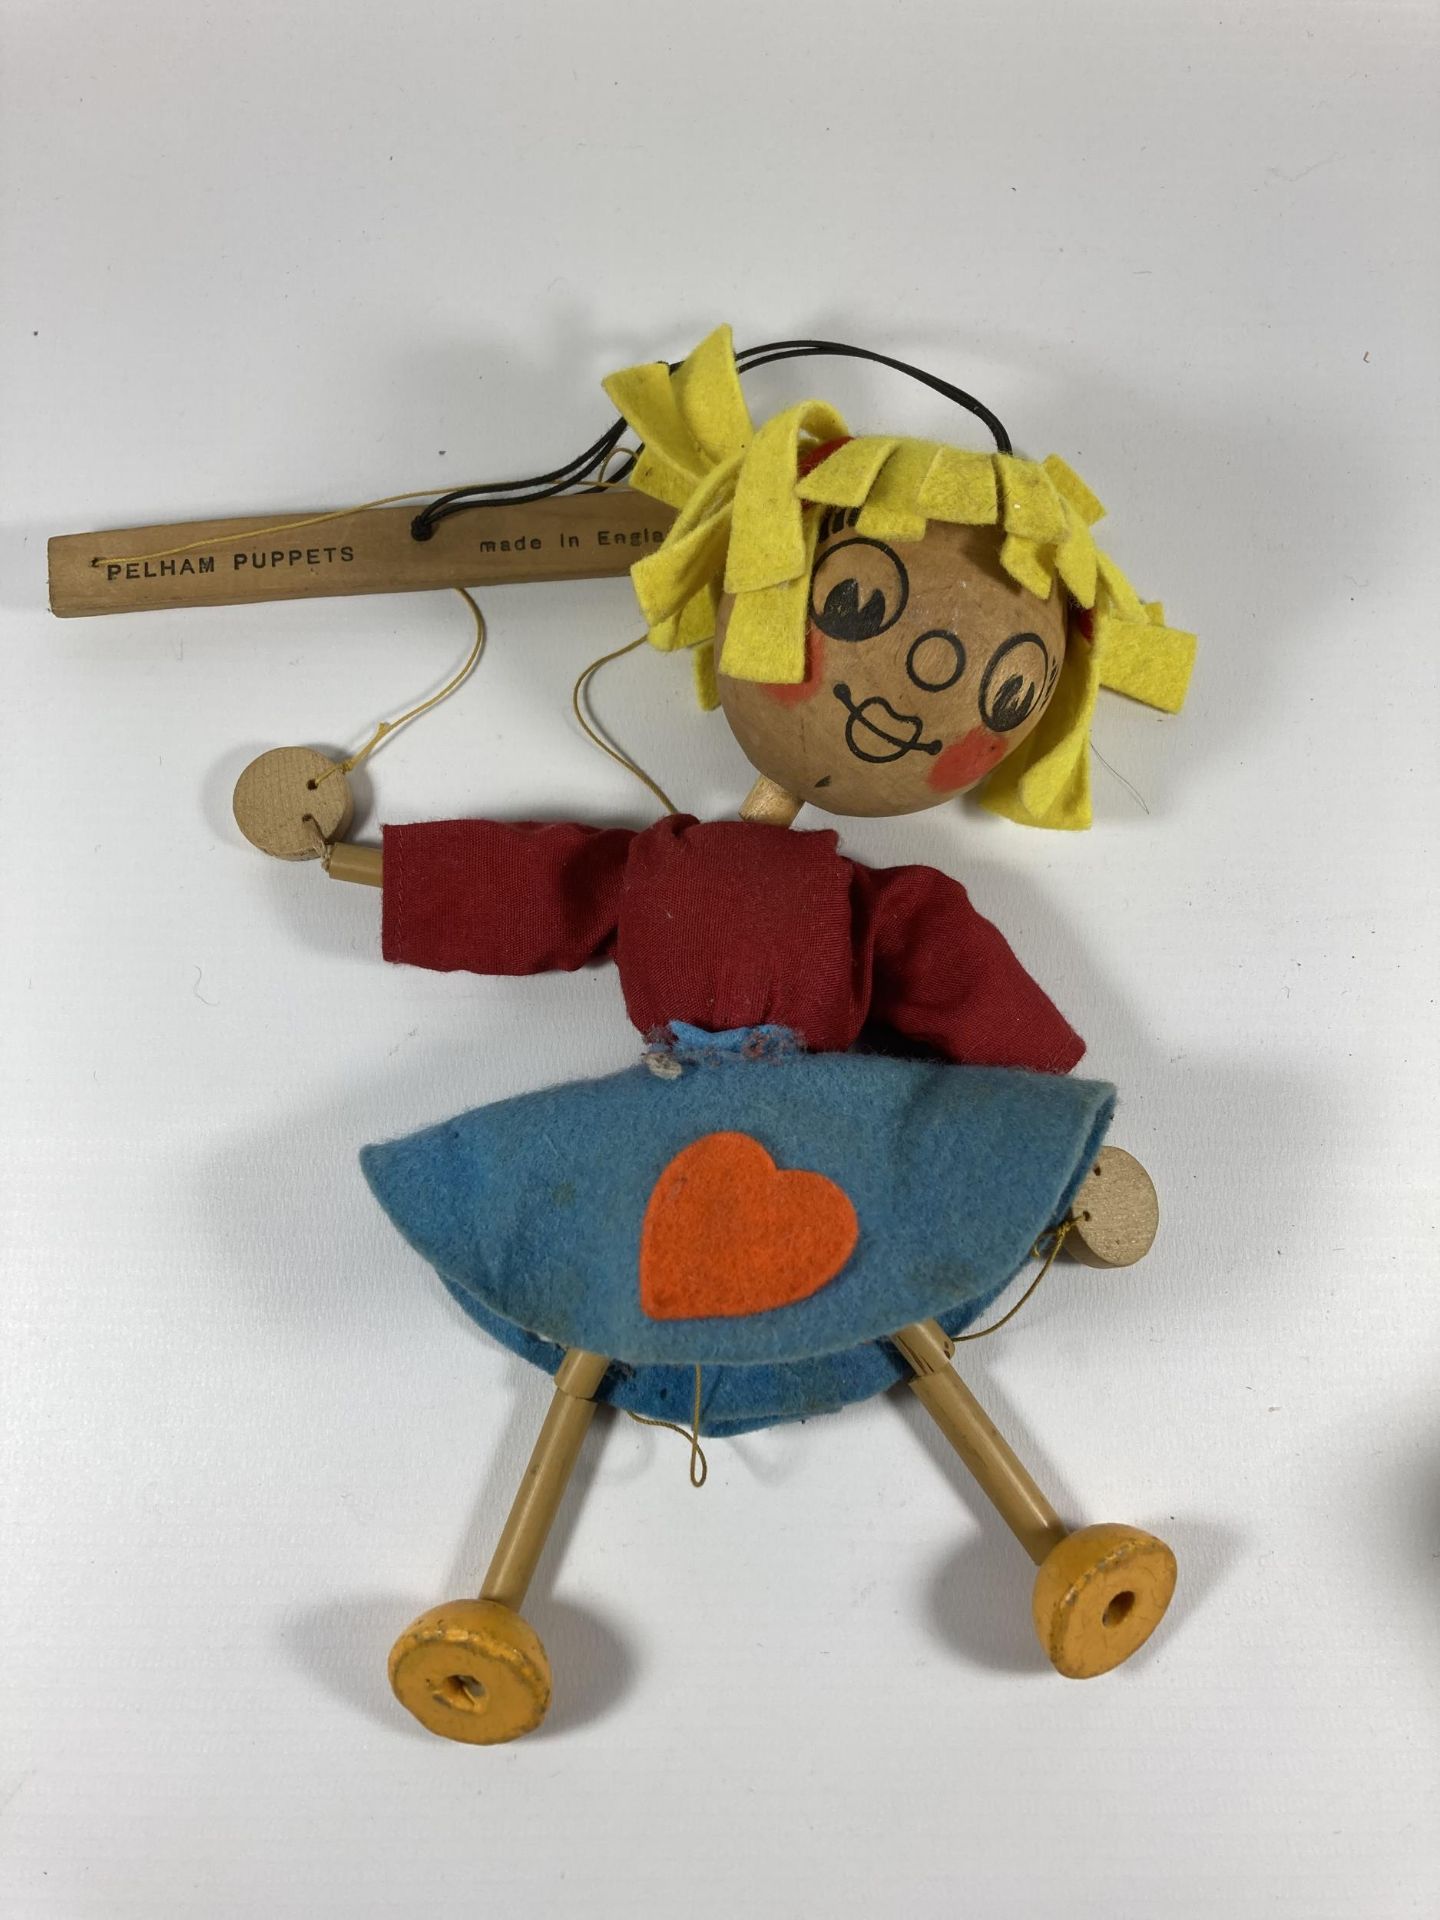 A VINTAGE PELHAM PUPPET - GIRL WITH YELLOW HAIR IN ORIGINAL BOX